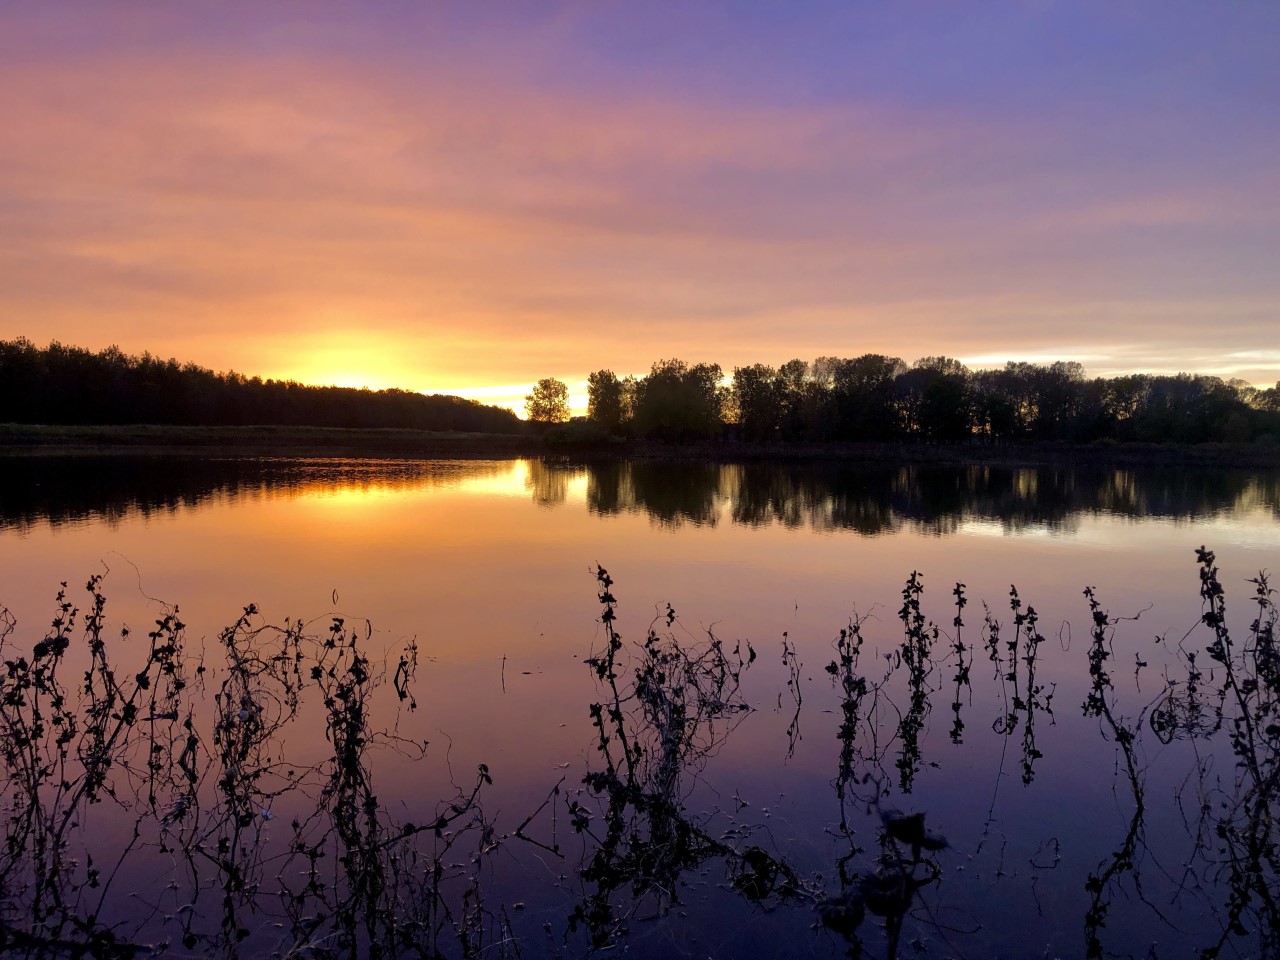 pale blue, purple and orange of a late fall sunset over a water filled wetland unit